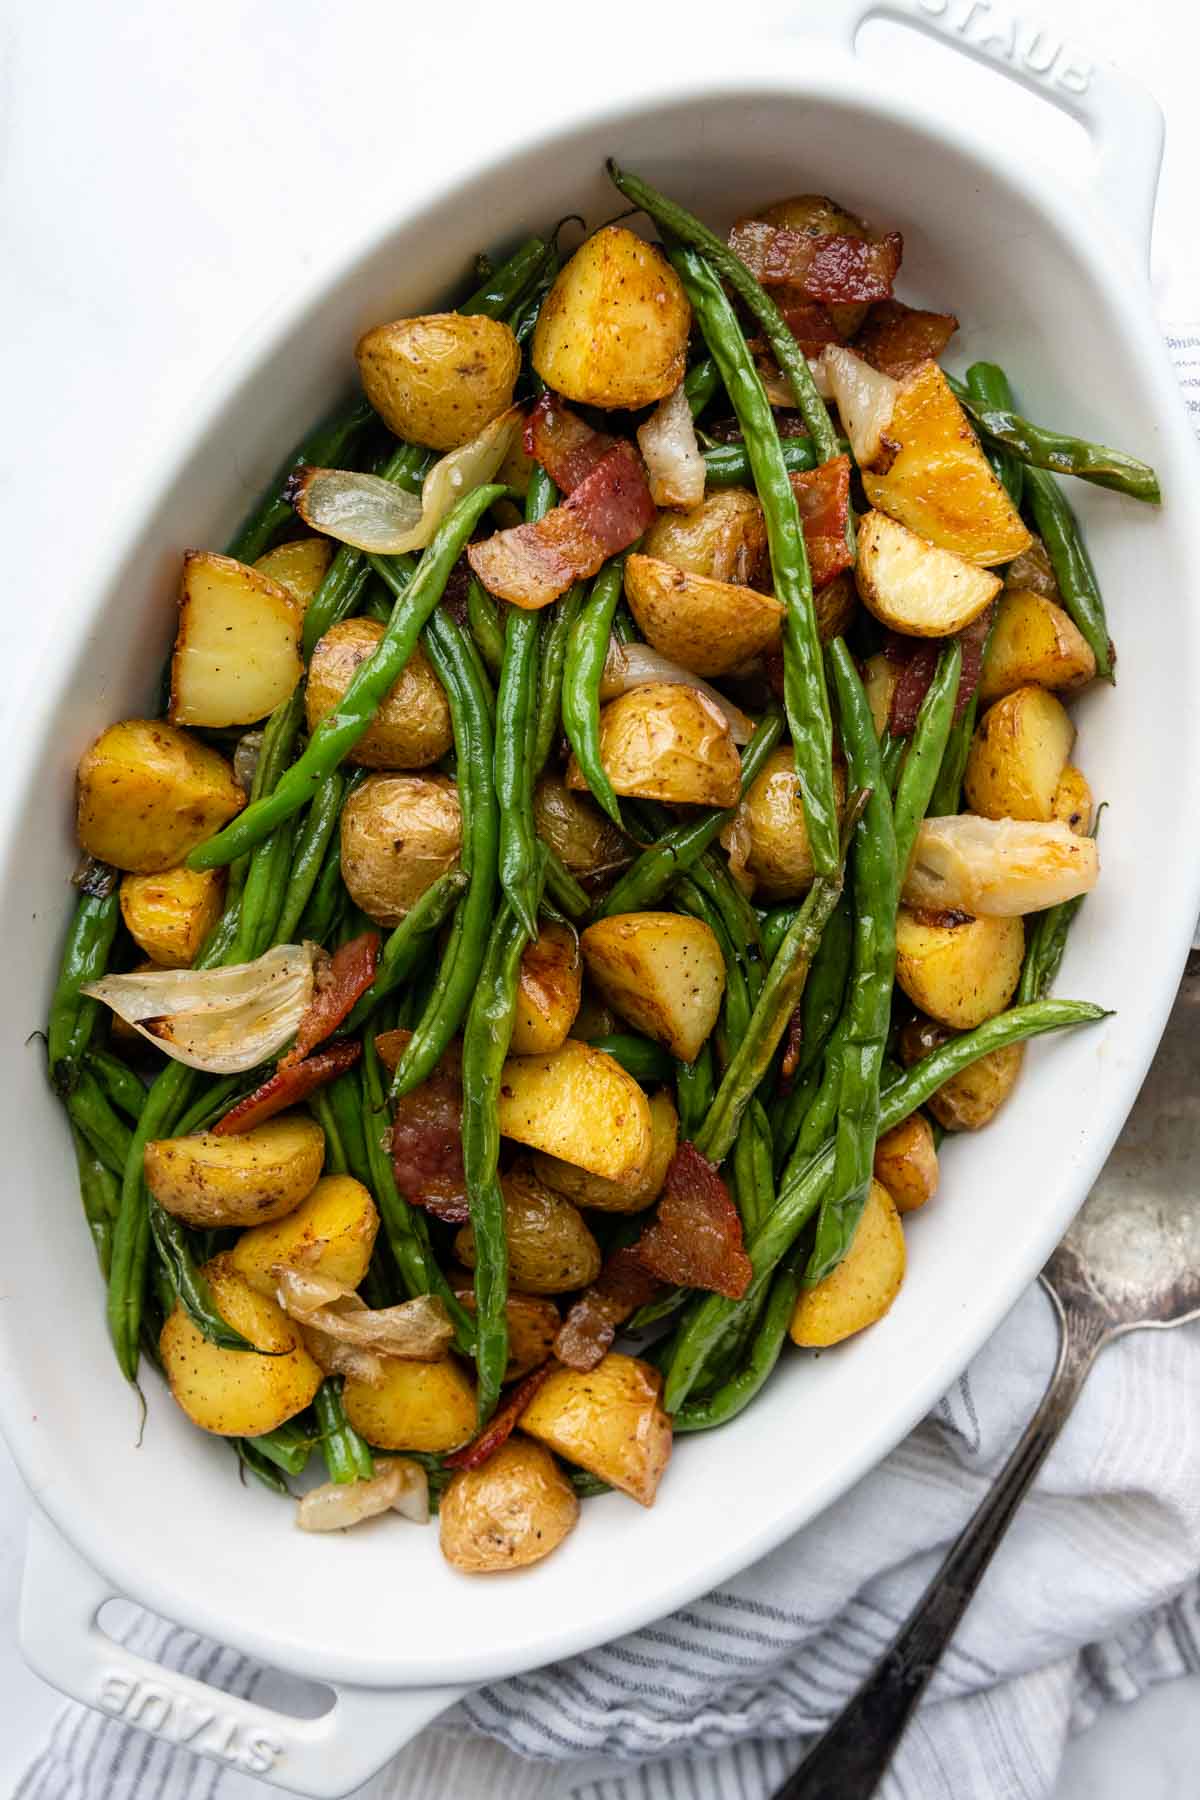 a serving dish full of green beans, potatoes, and bacon with onion.